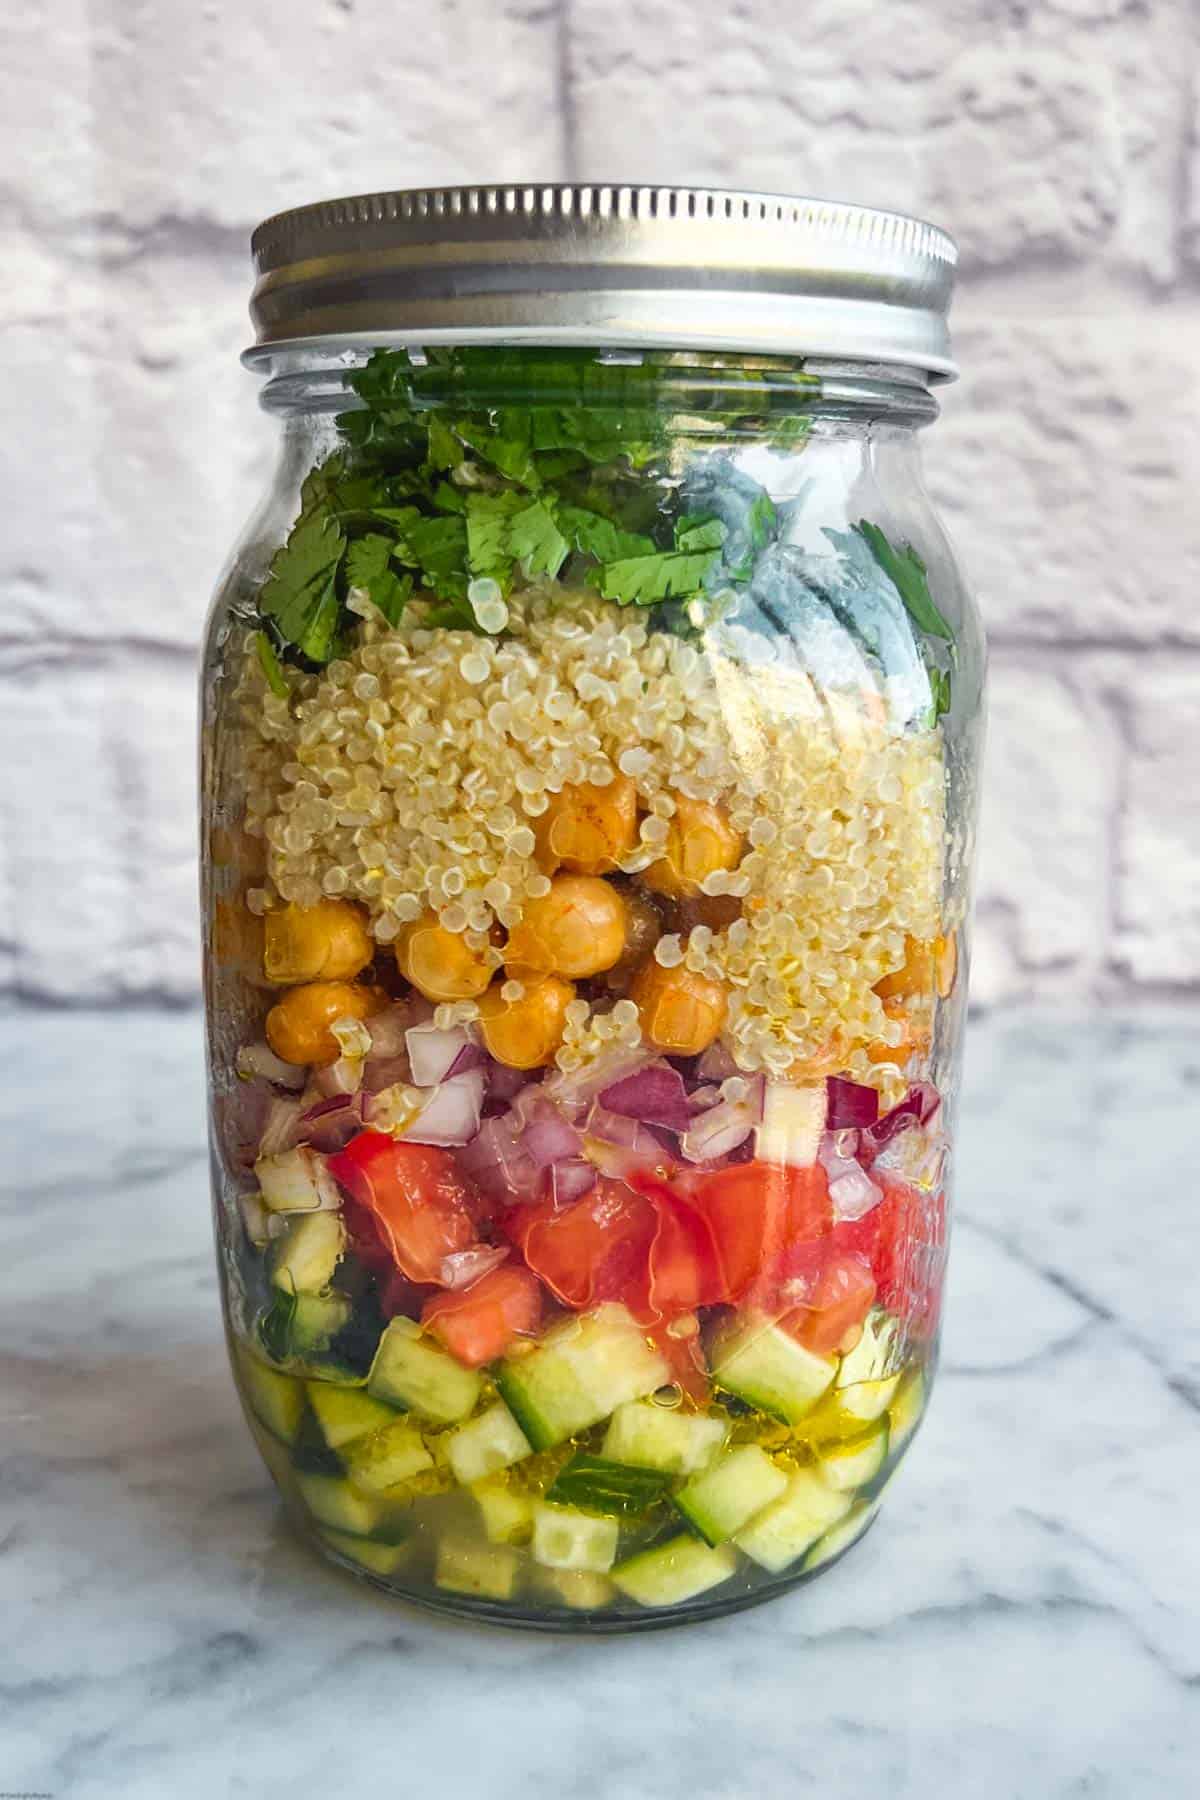 32-ounce salad jar with olive oil, lemon juice, chopped cucumber, tomato, red onion, roasted chickpeas, quinoa, hemp seeds, and cilantro.